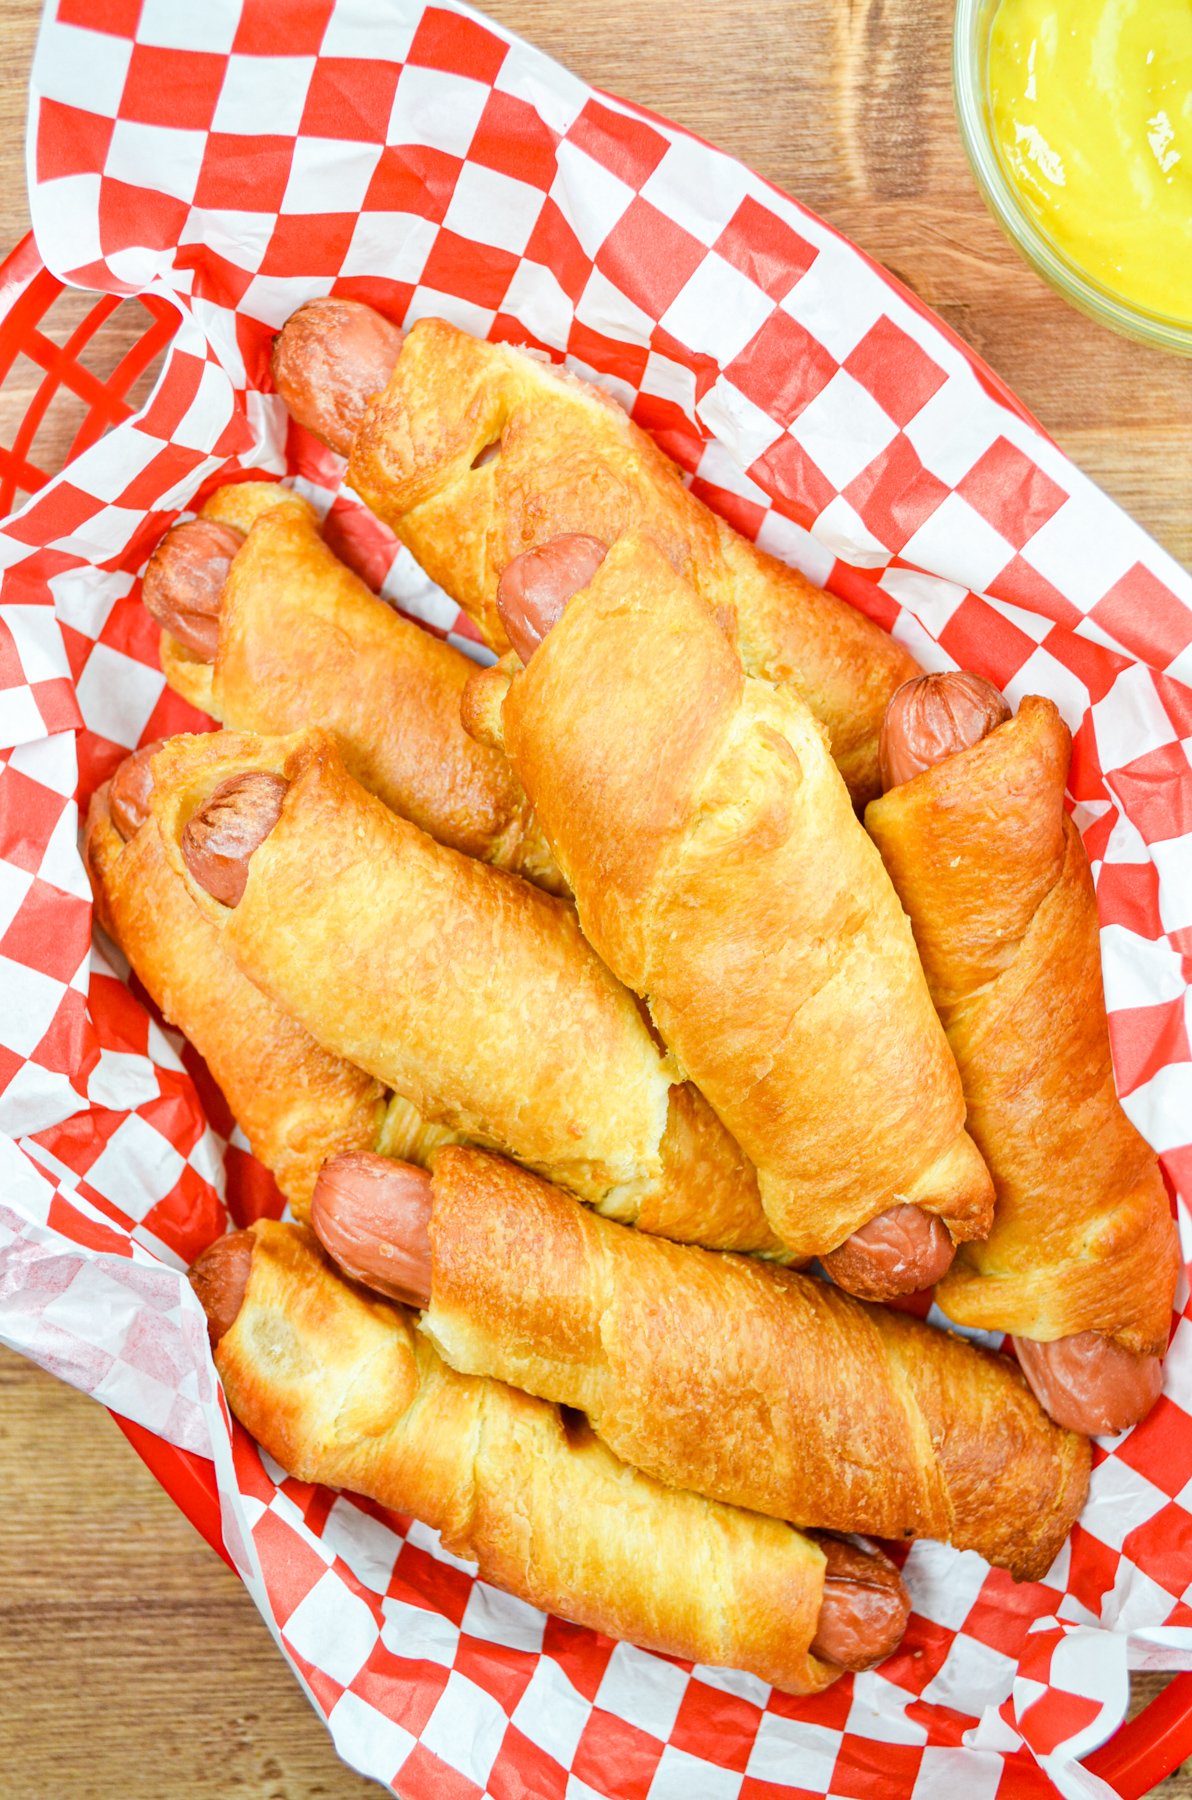 A basket full of pigs in a blanket, with mustard on the side.